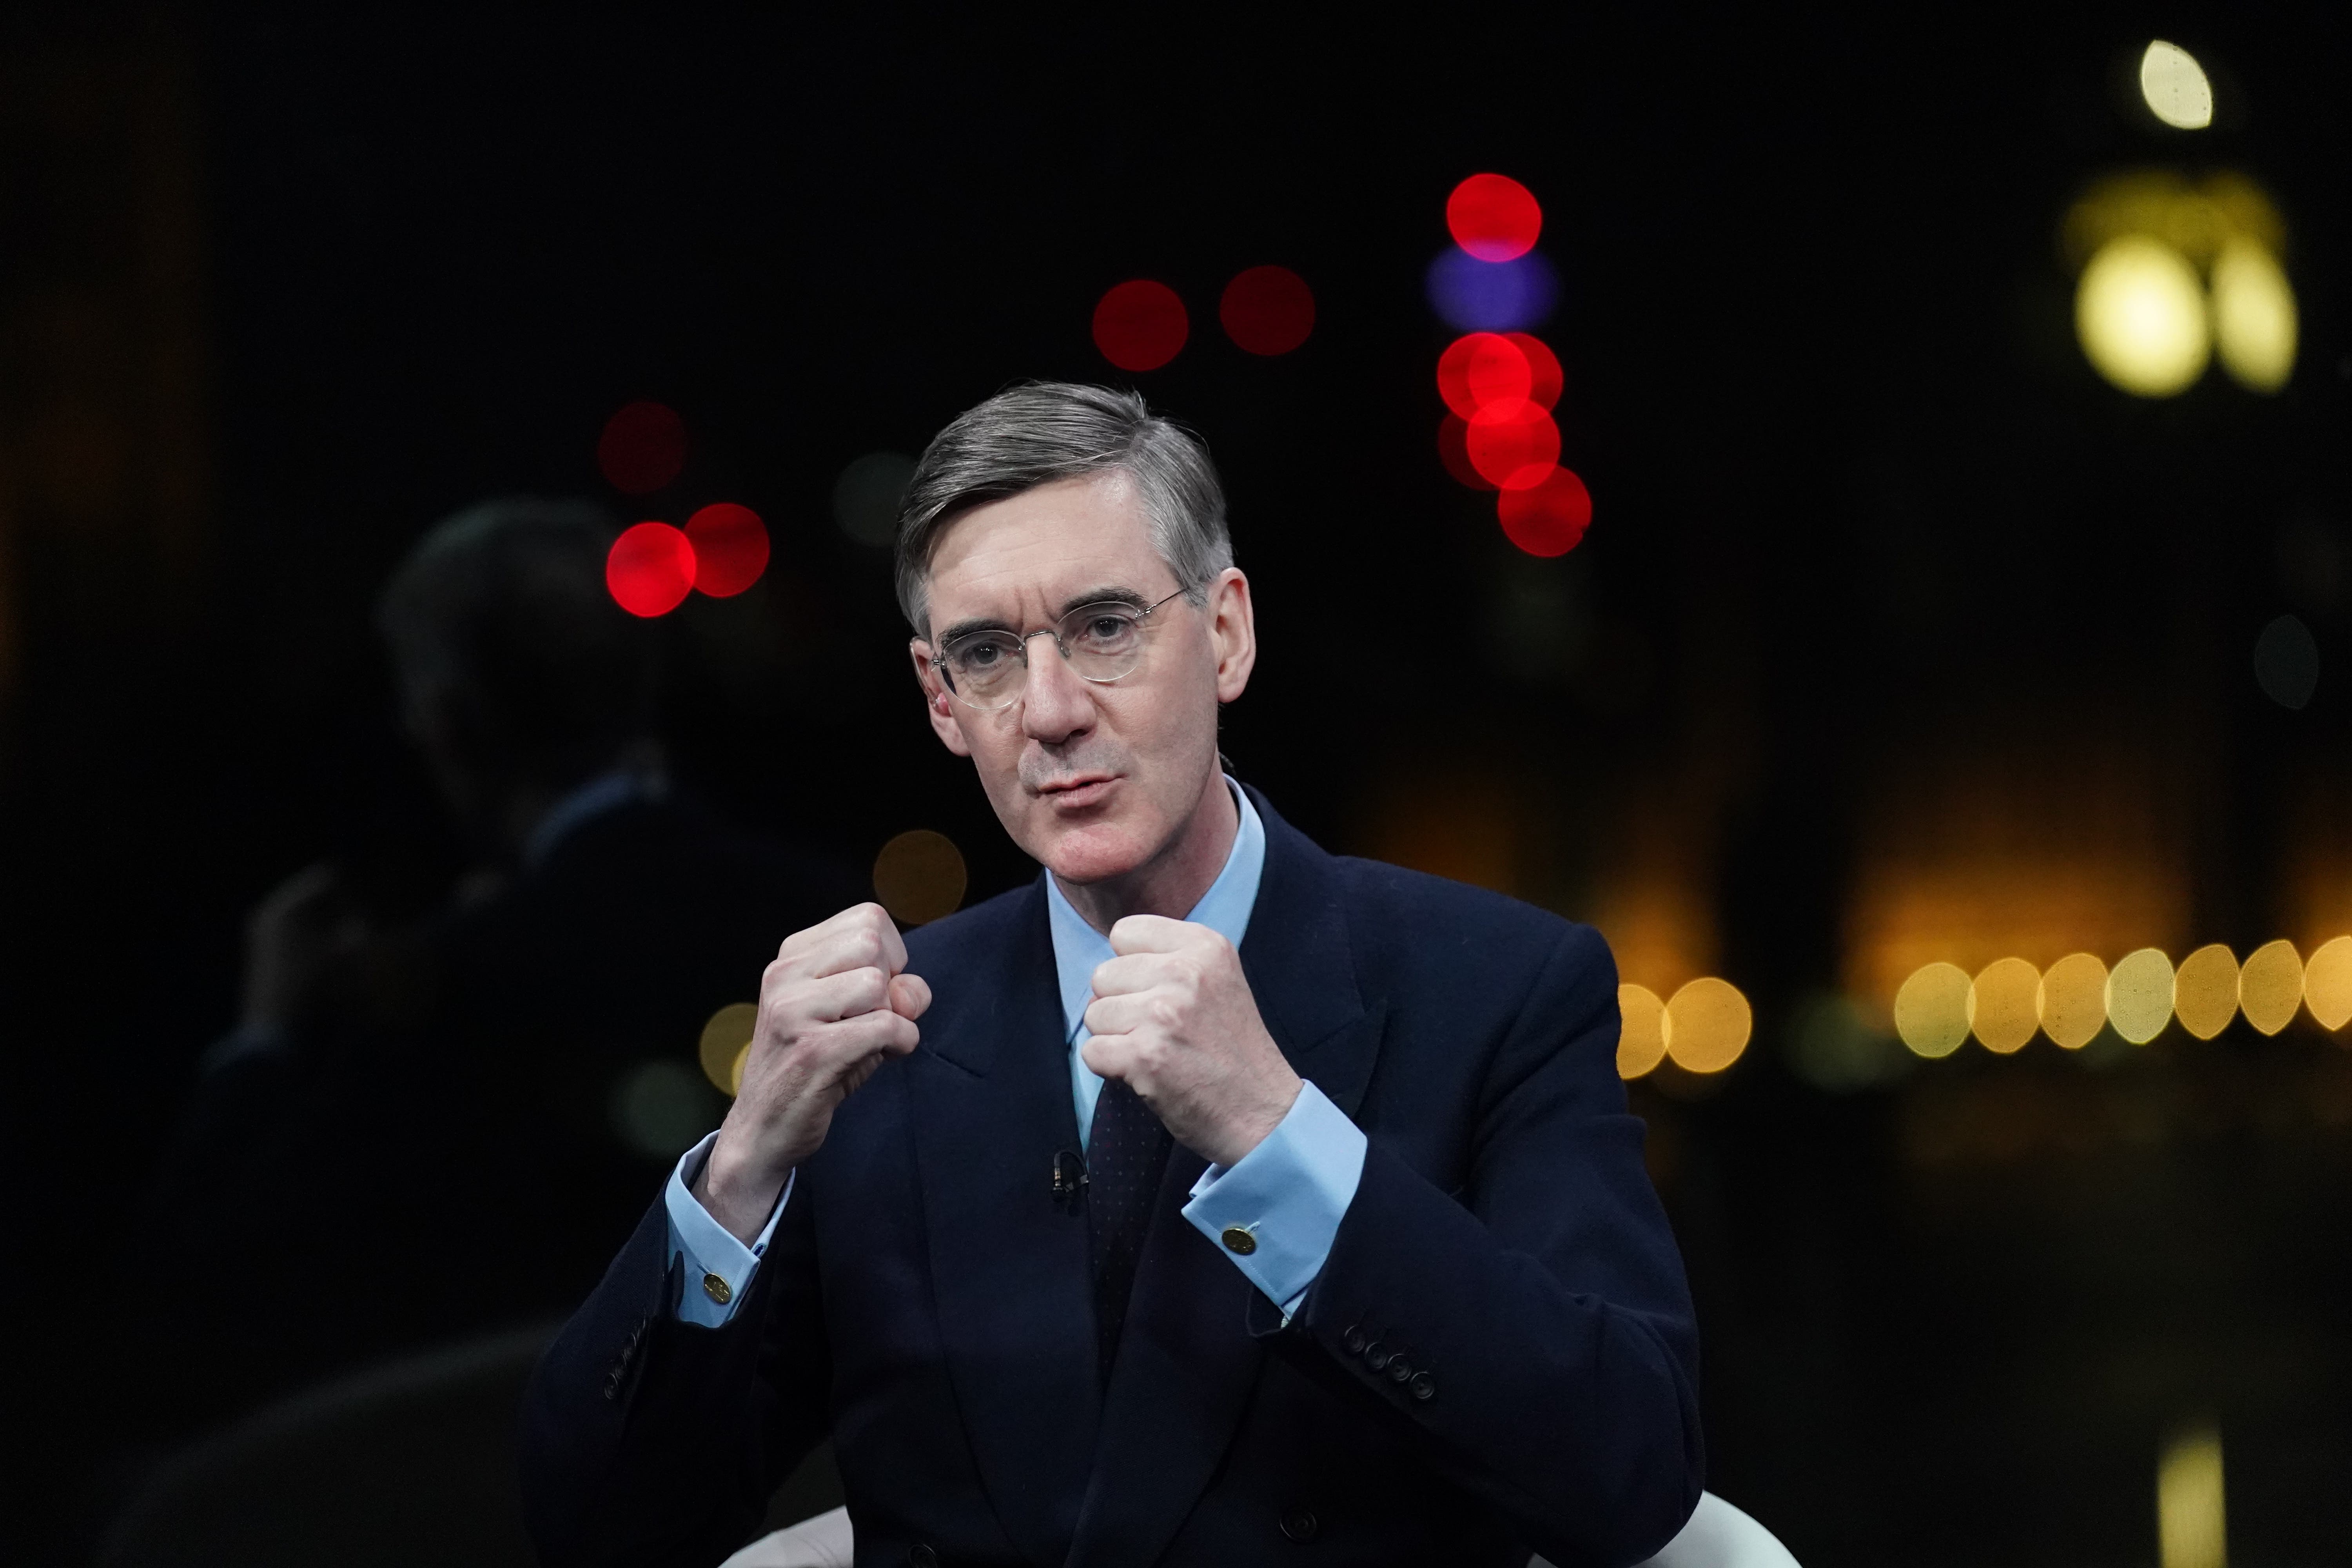 Jacob Rees-Mogg in the studio at GB News